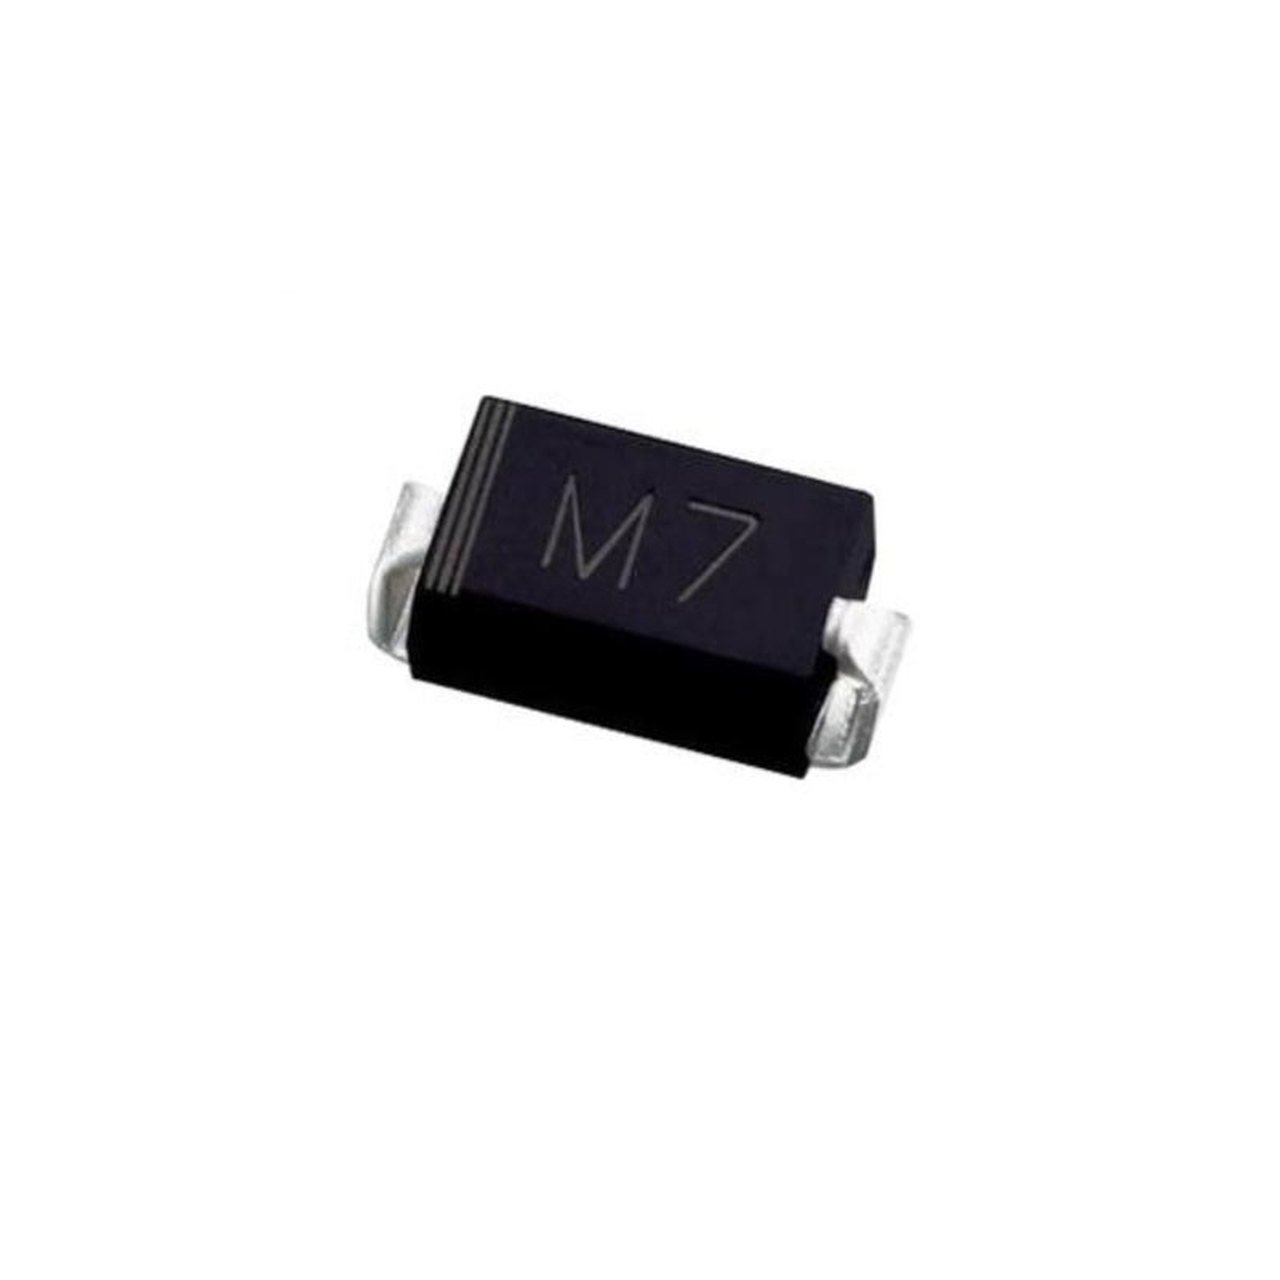 M7 50V 1A Surface Mount Rectifier Diode